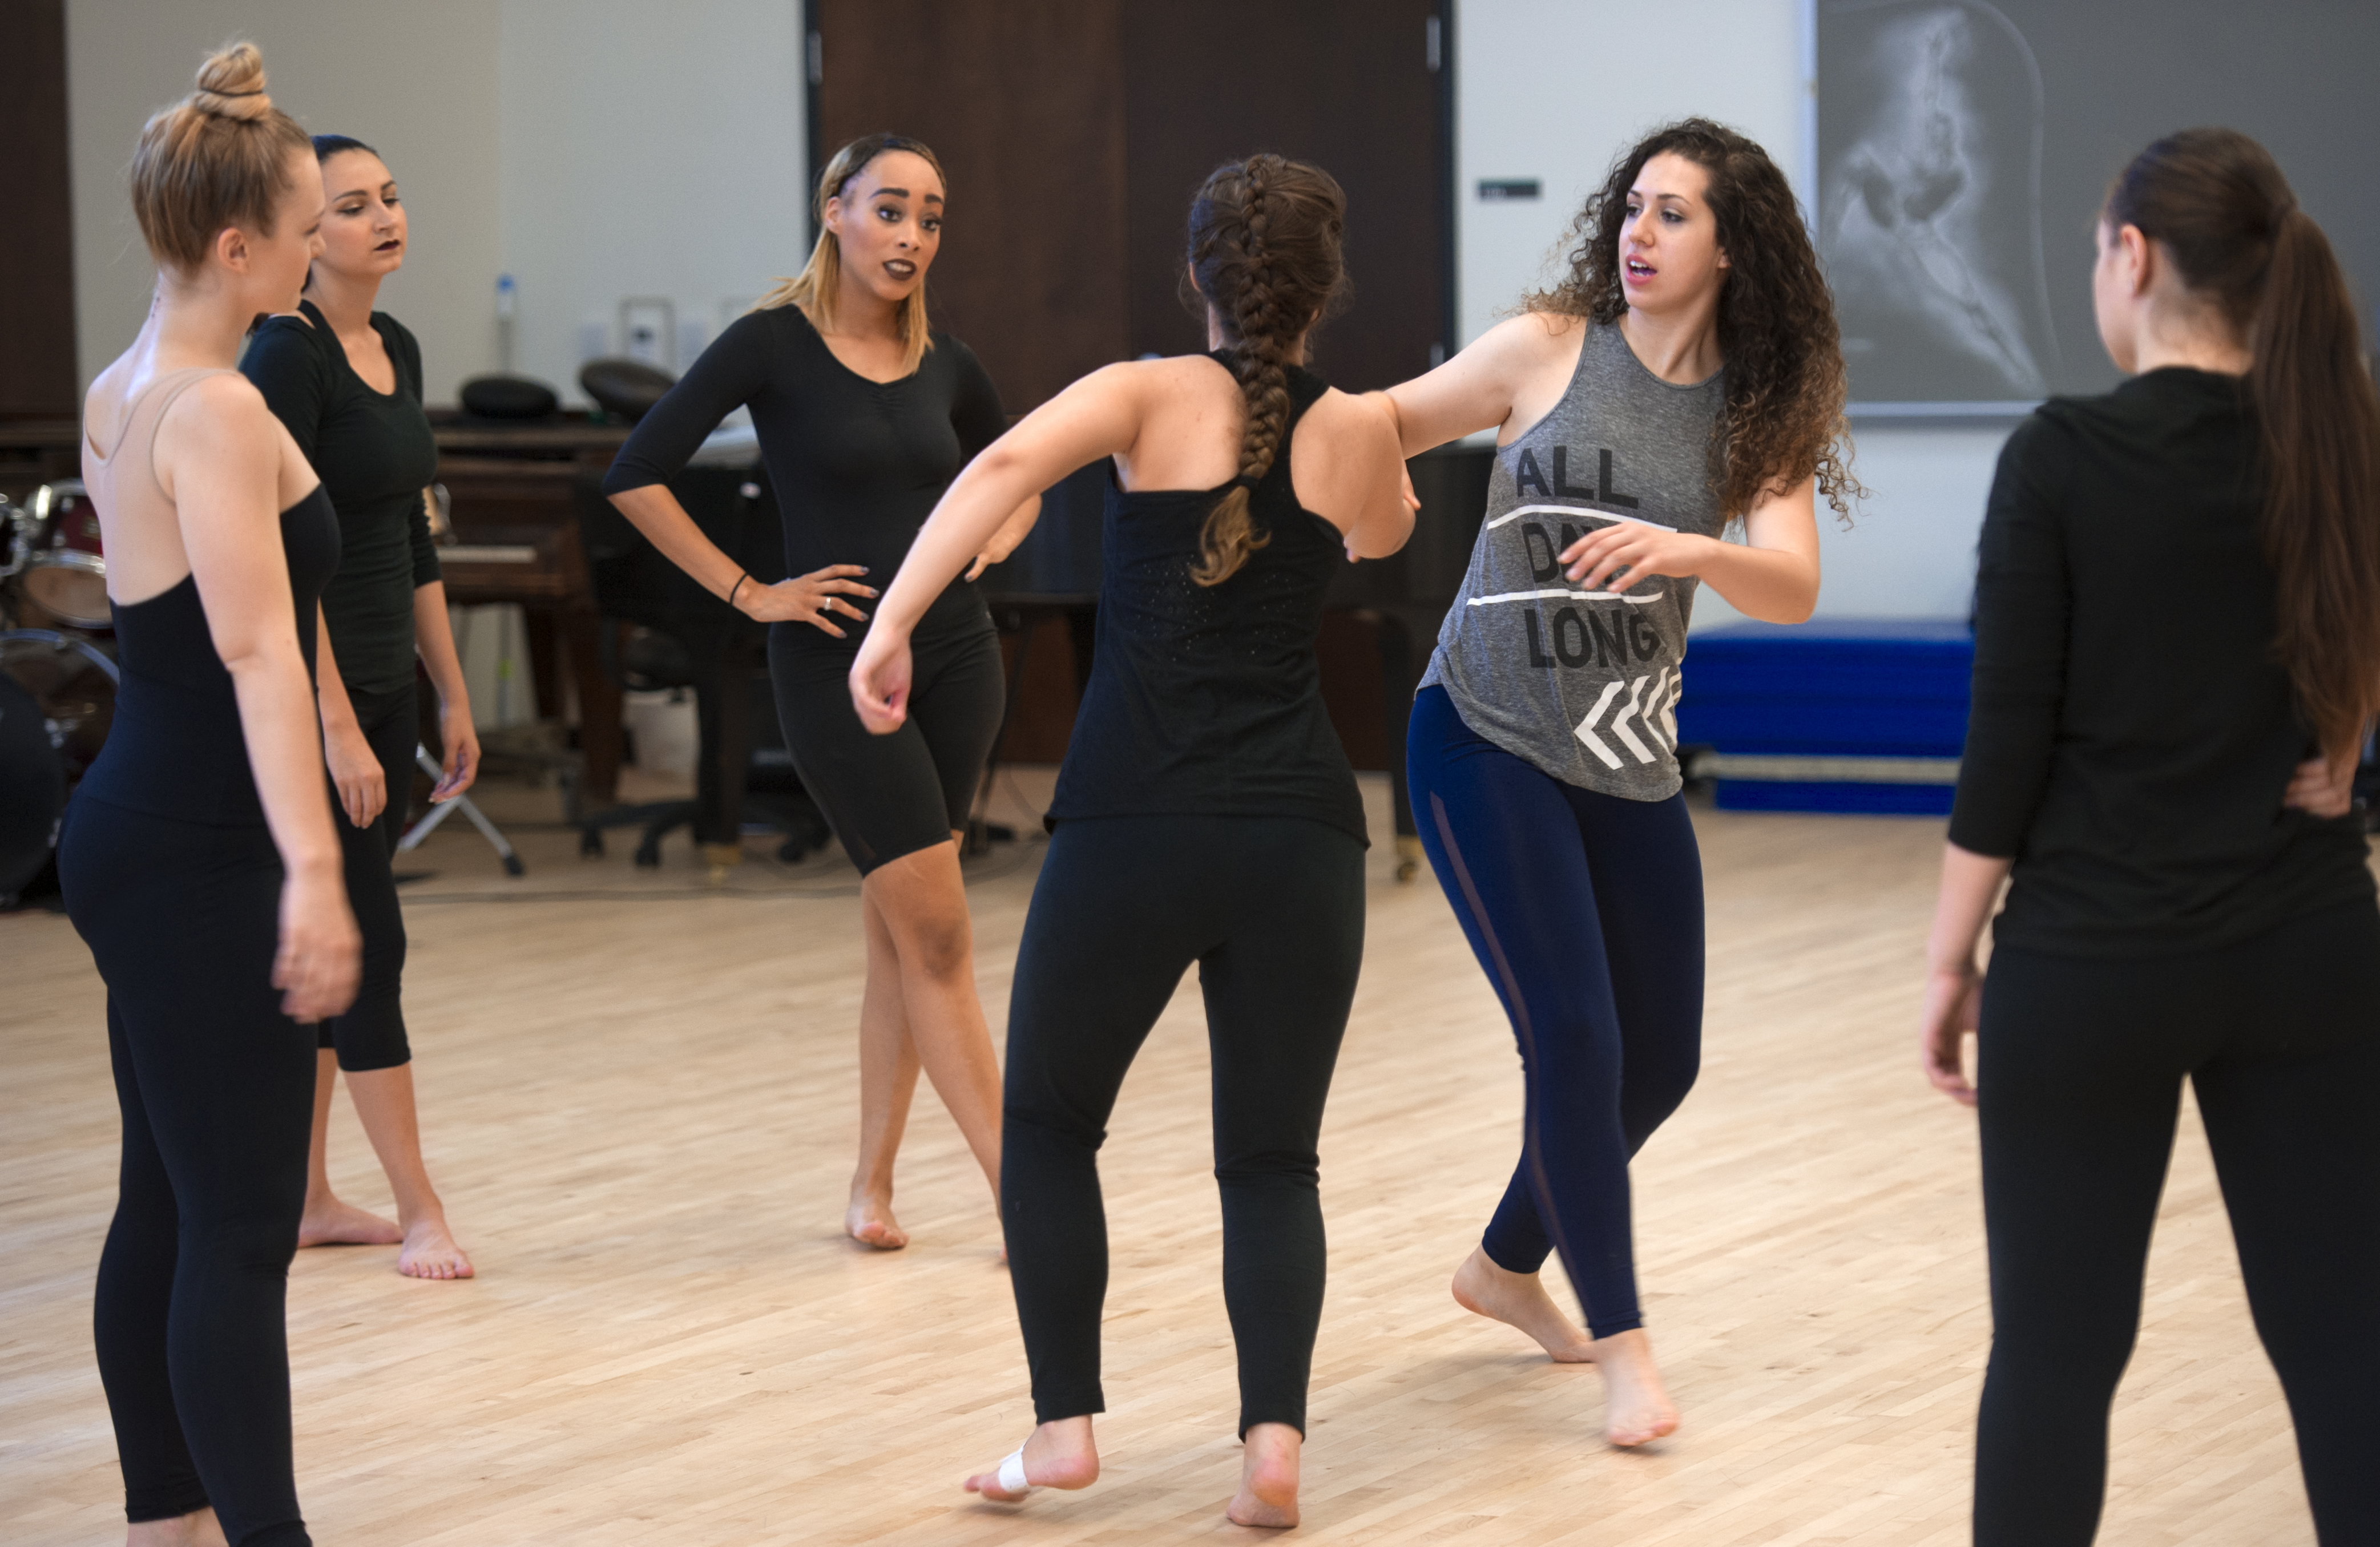 UNT students tell stories through dance at New Choreographers Concert Dec. 2-4